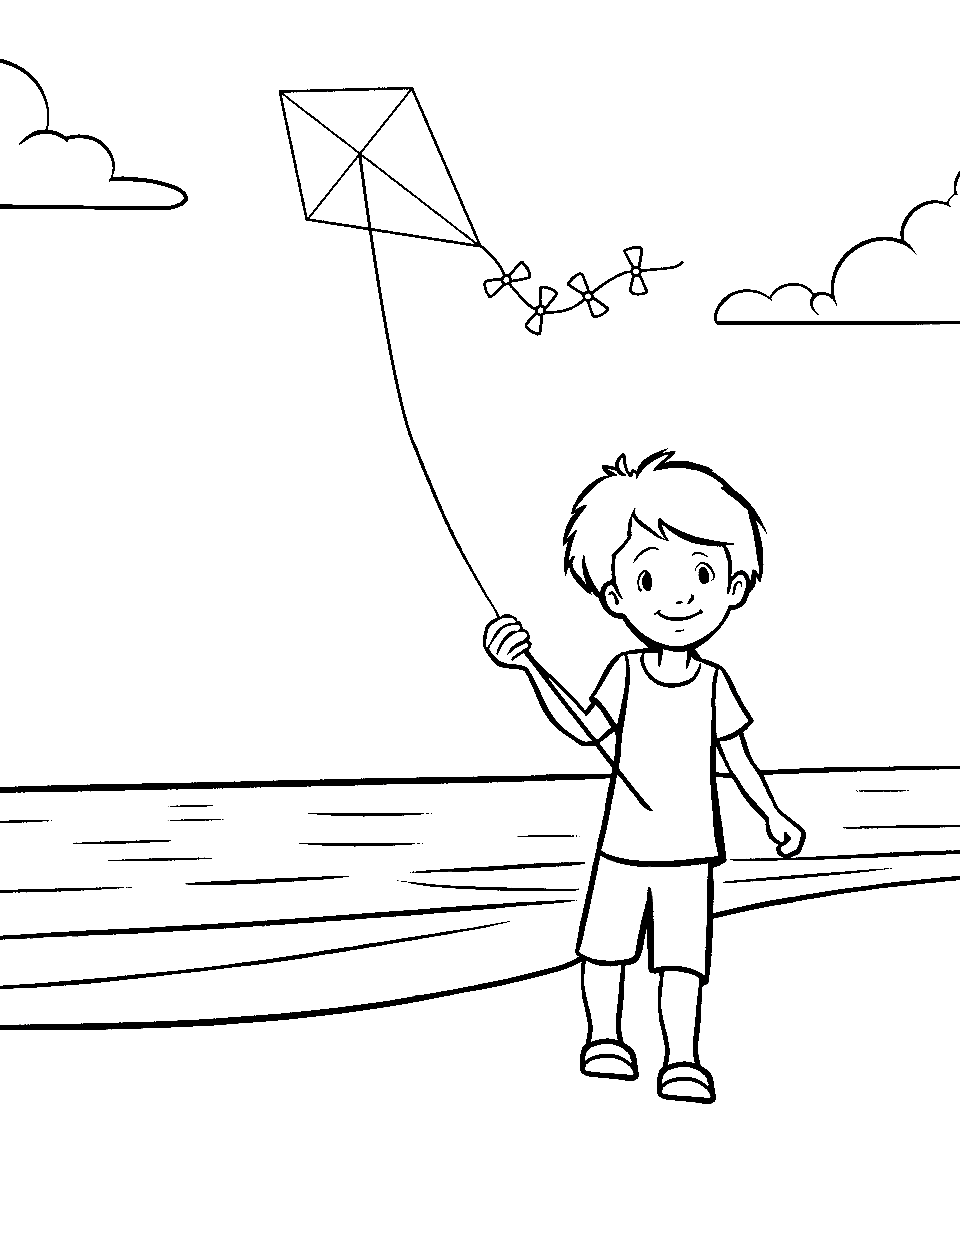 Flying Kite on the Beach Ocean Coloring Page - A child flying a kite on the beach, with the ocean in the background.